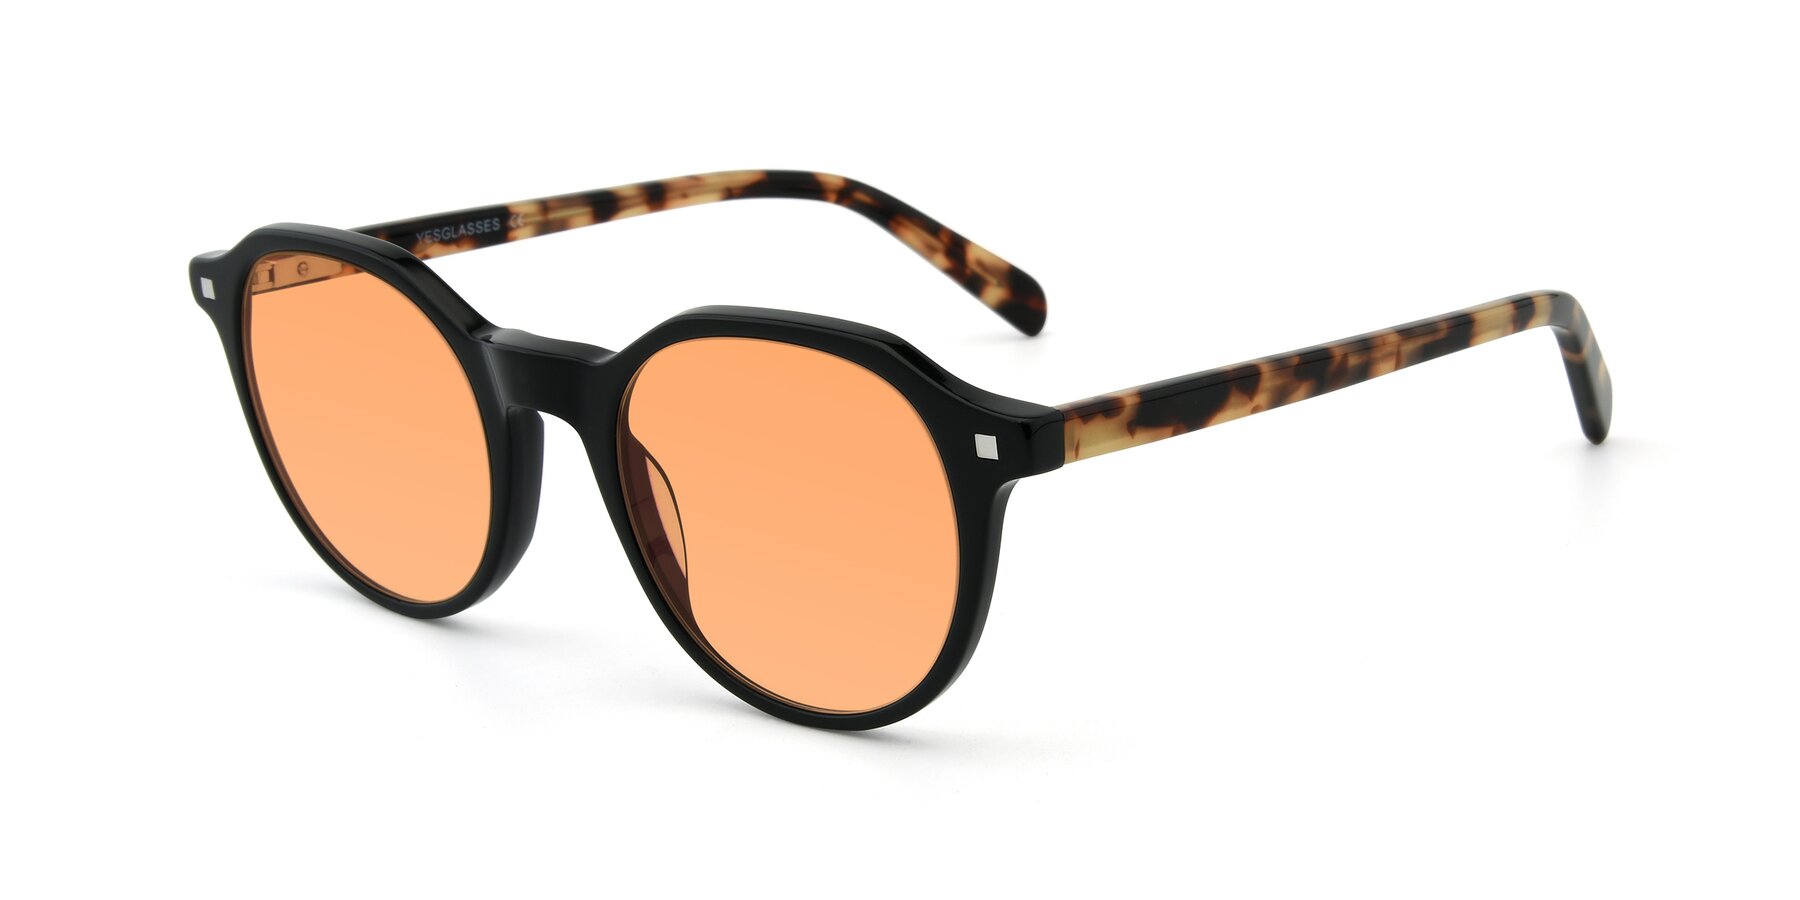 Angle of 17425 in Black with Medium Orange Tinted Lenses